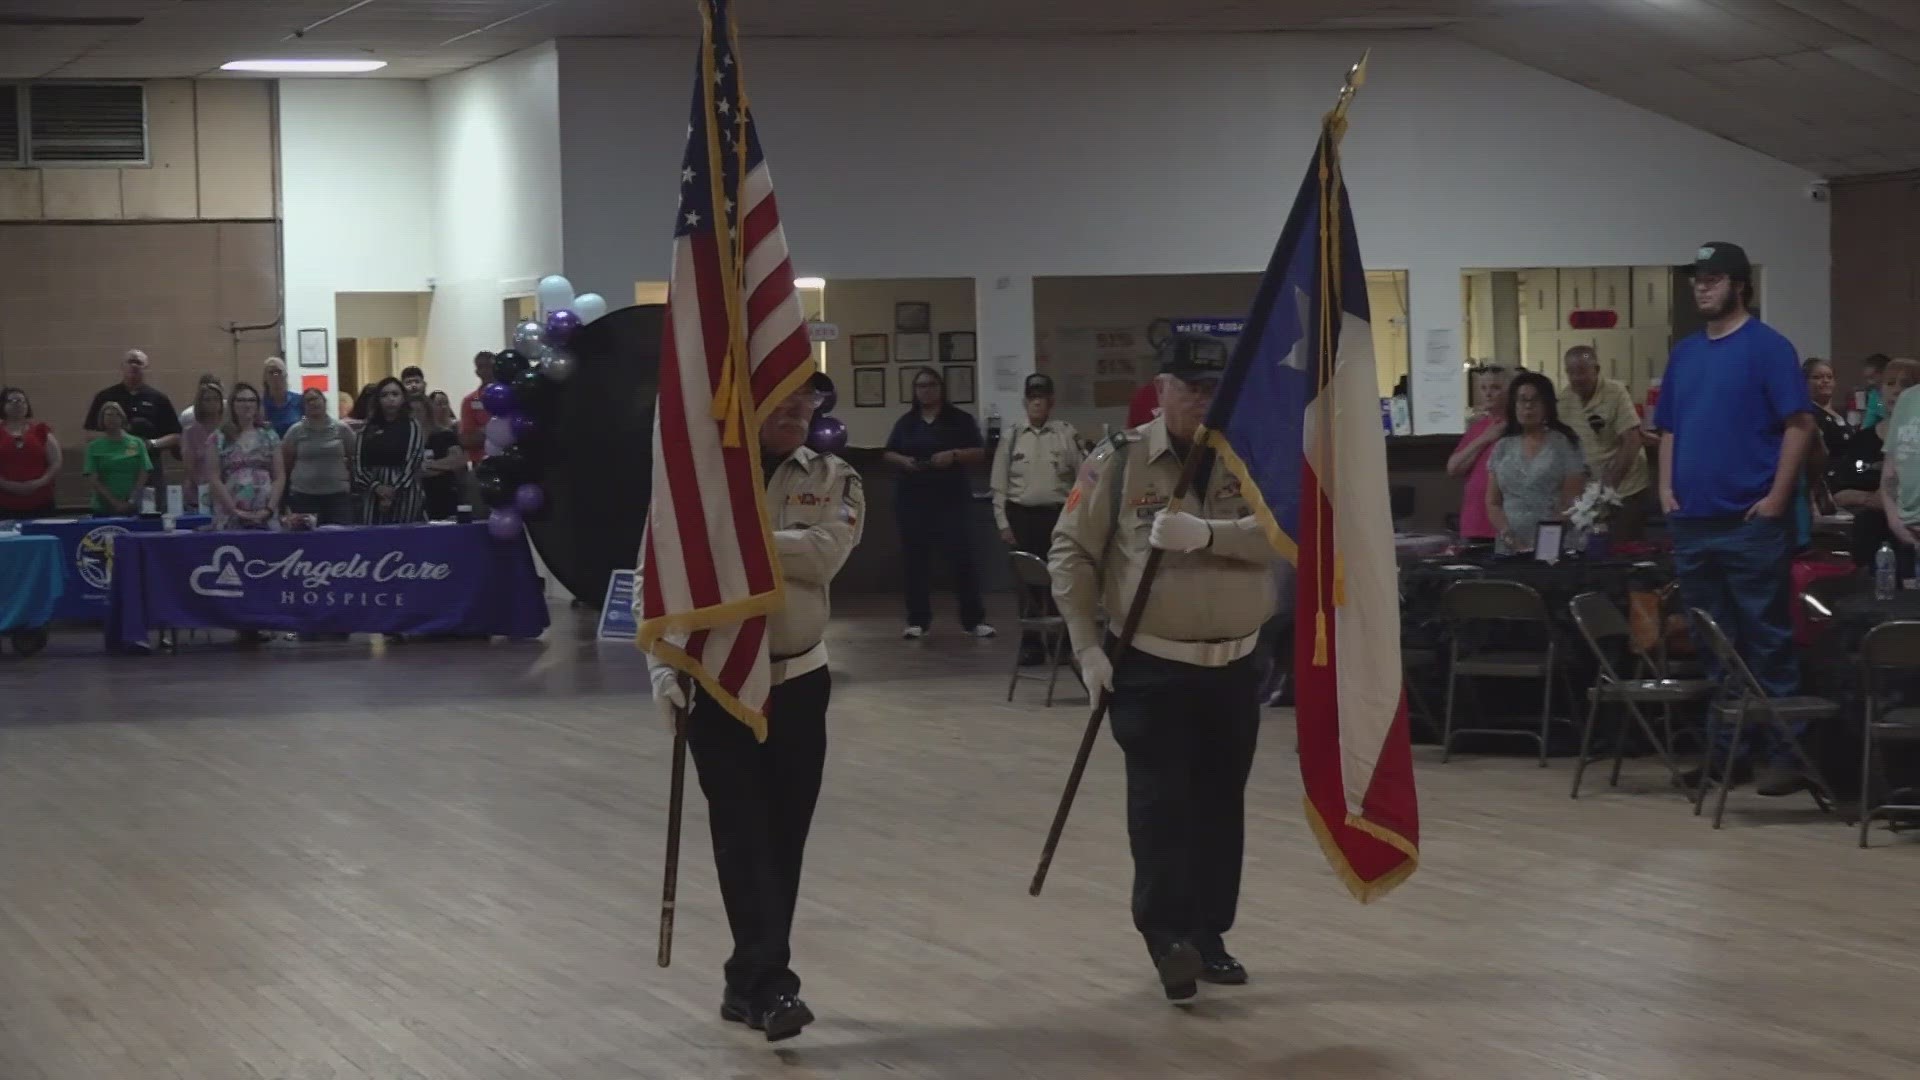 Several organizations came together to bring awareness to elder abuse.